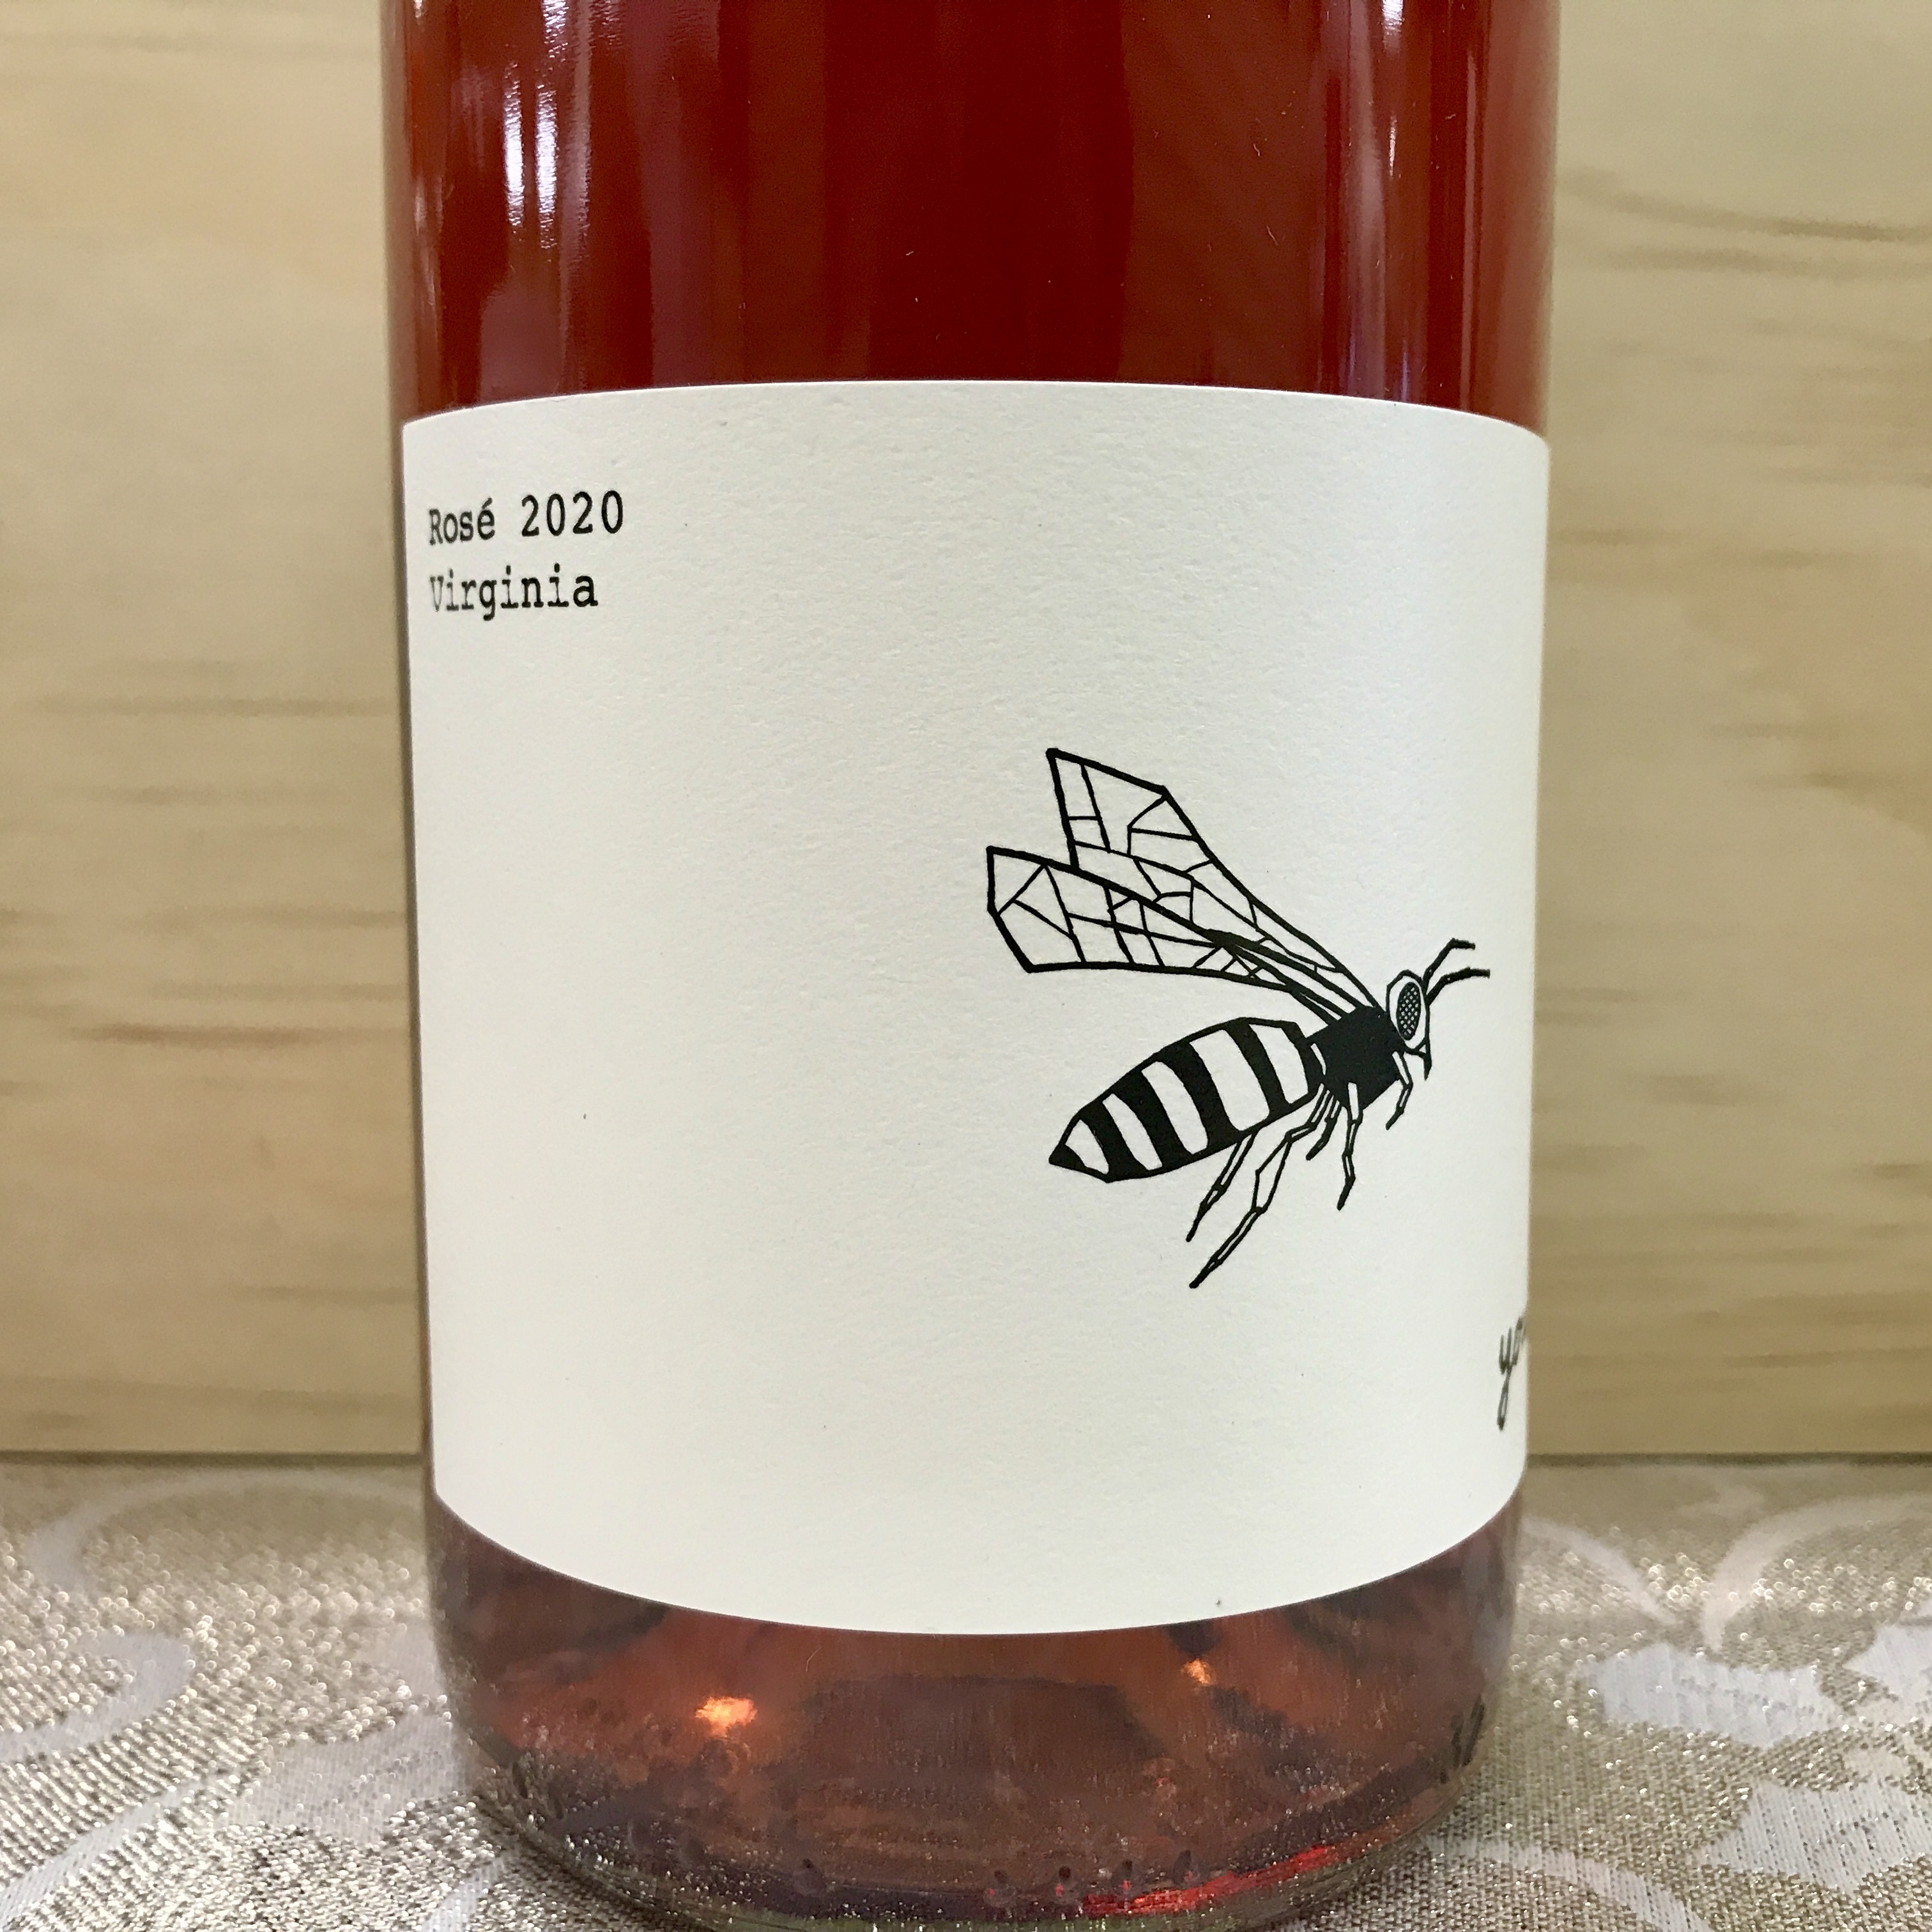 Early Mountain 'young wine' Rose 2020